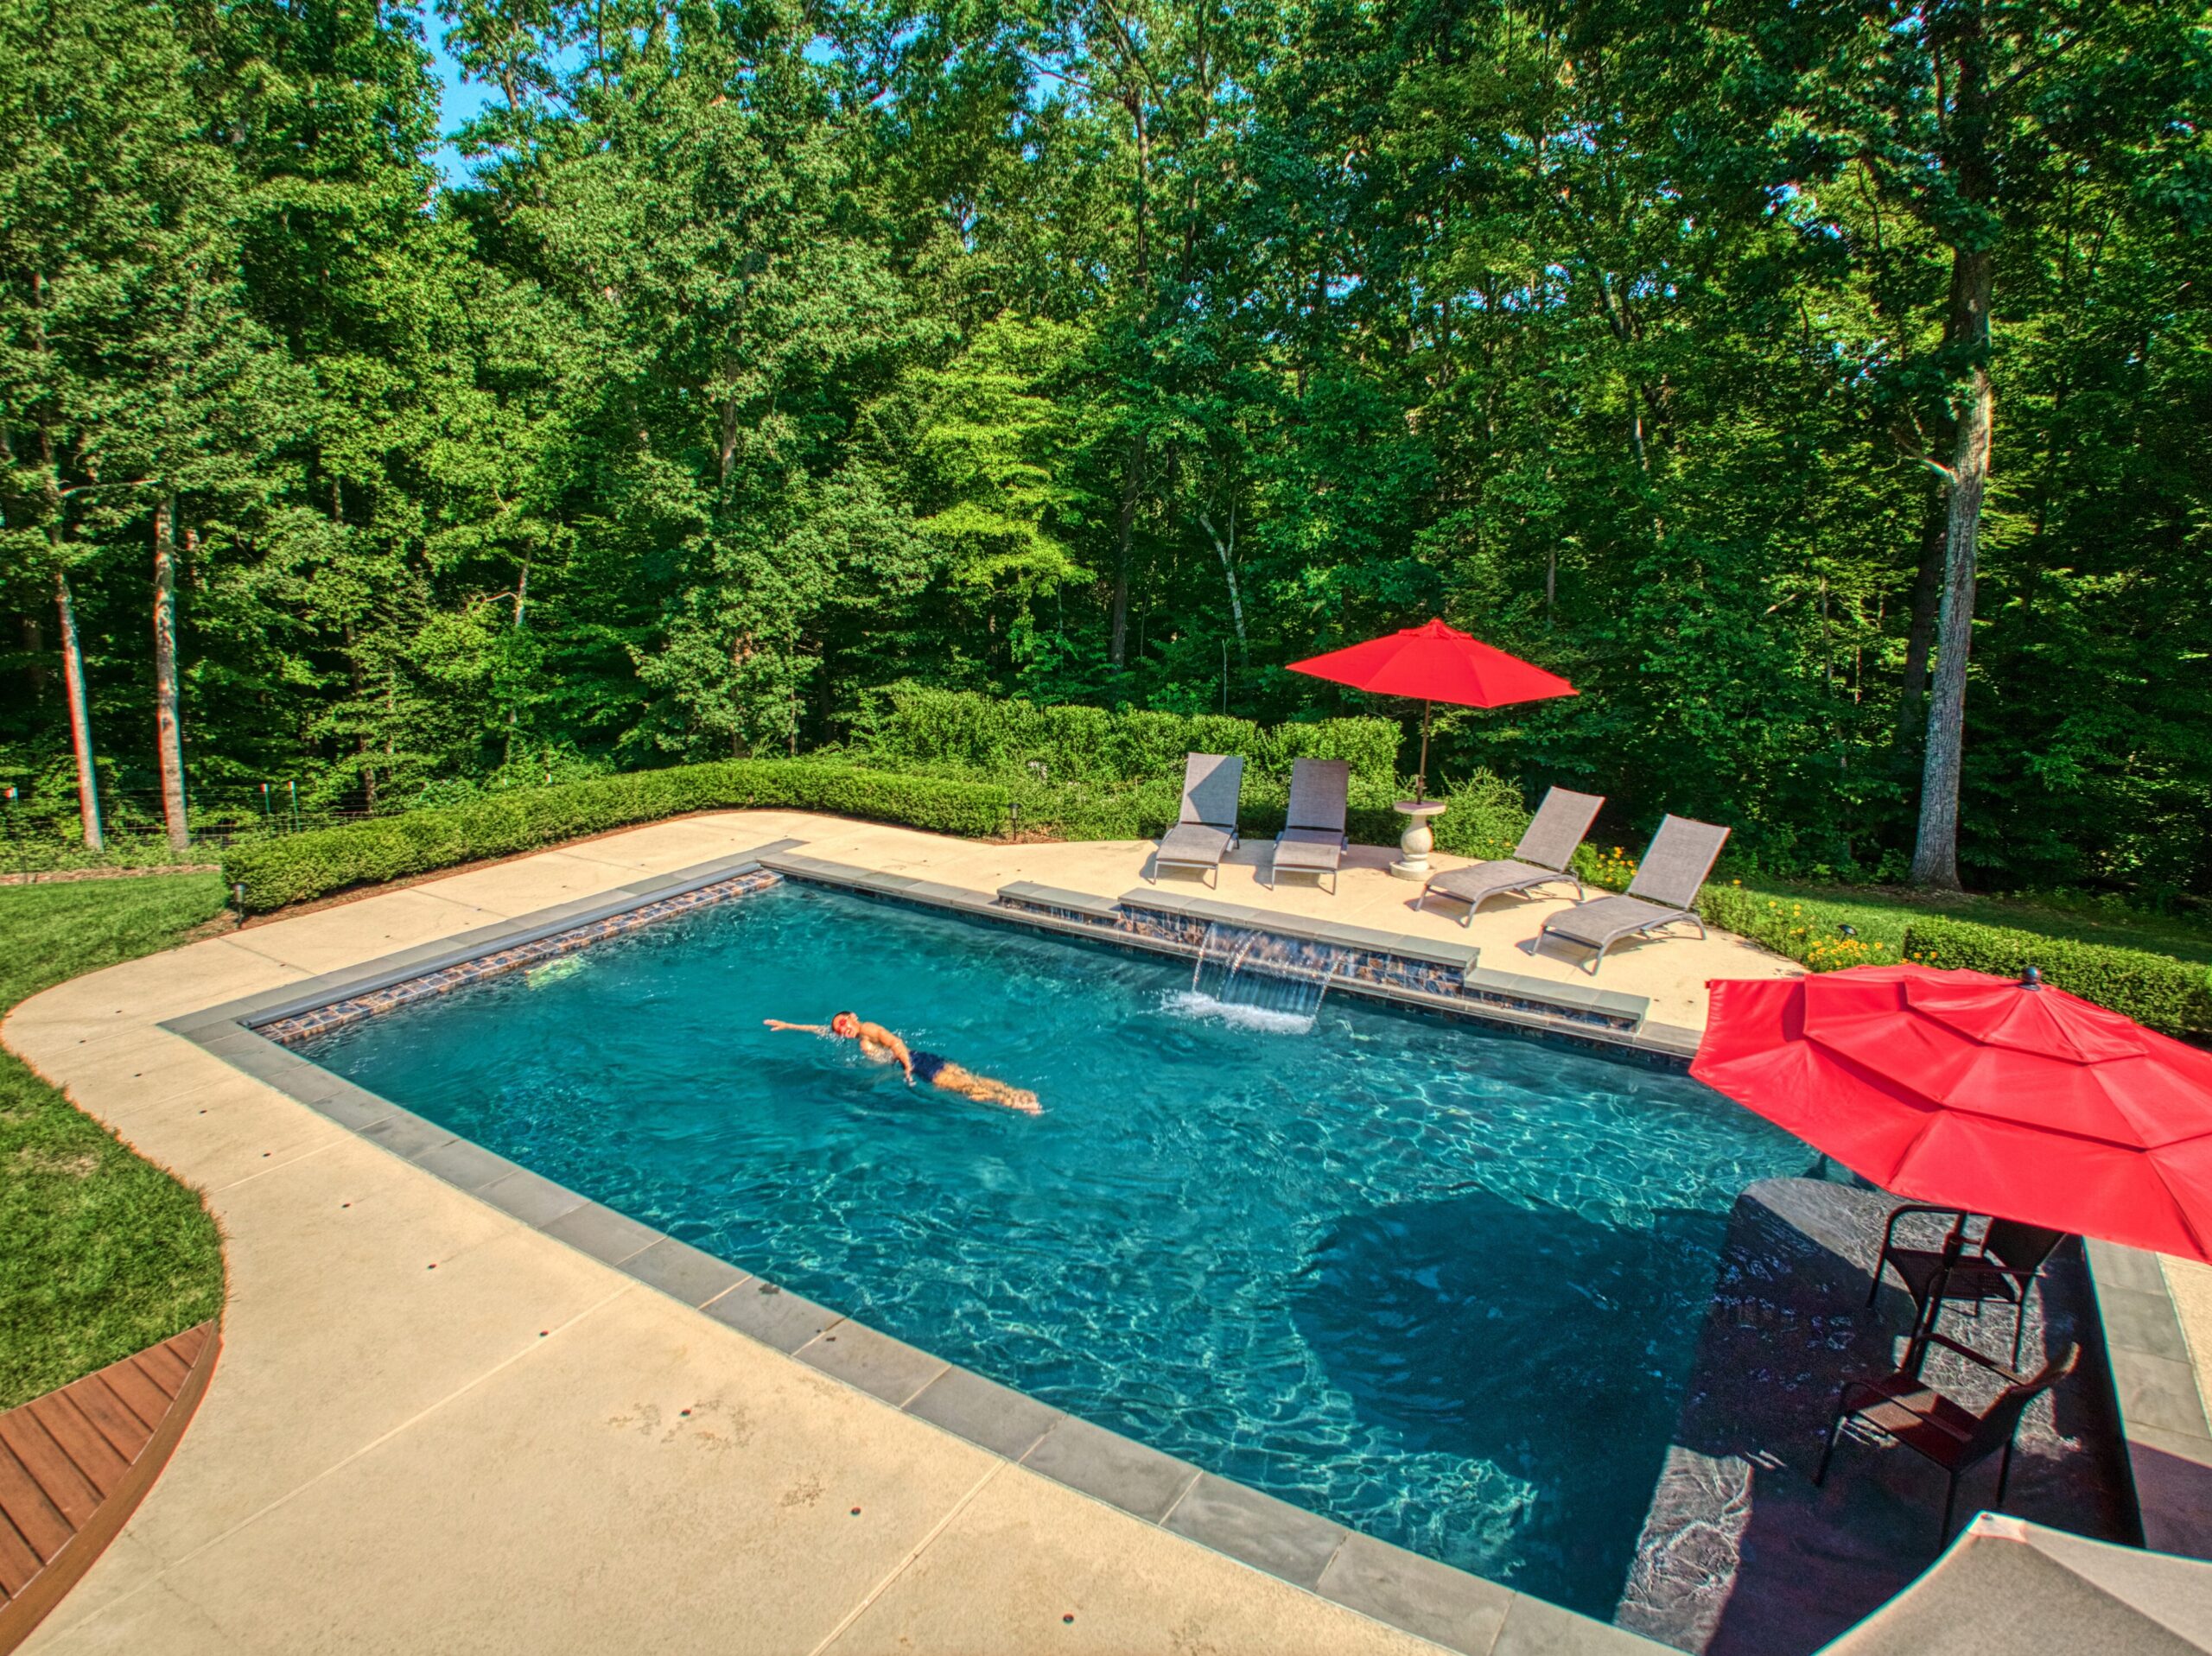 Professional exterior photo of 40046 Mount Gilead Rd in Leesburg, Virginia - showing the in ground pool with waterfall on a sunny day while a man does laps